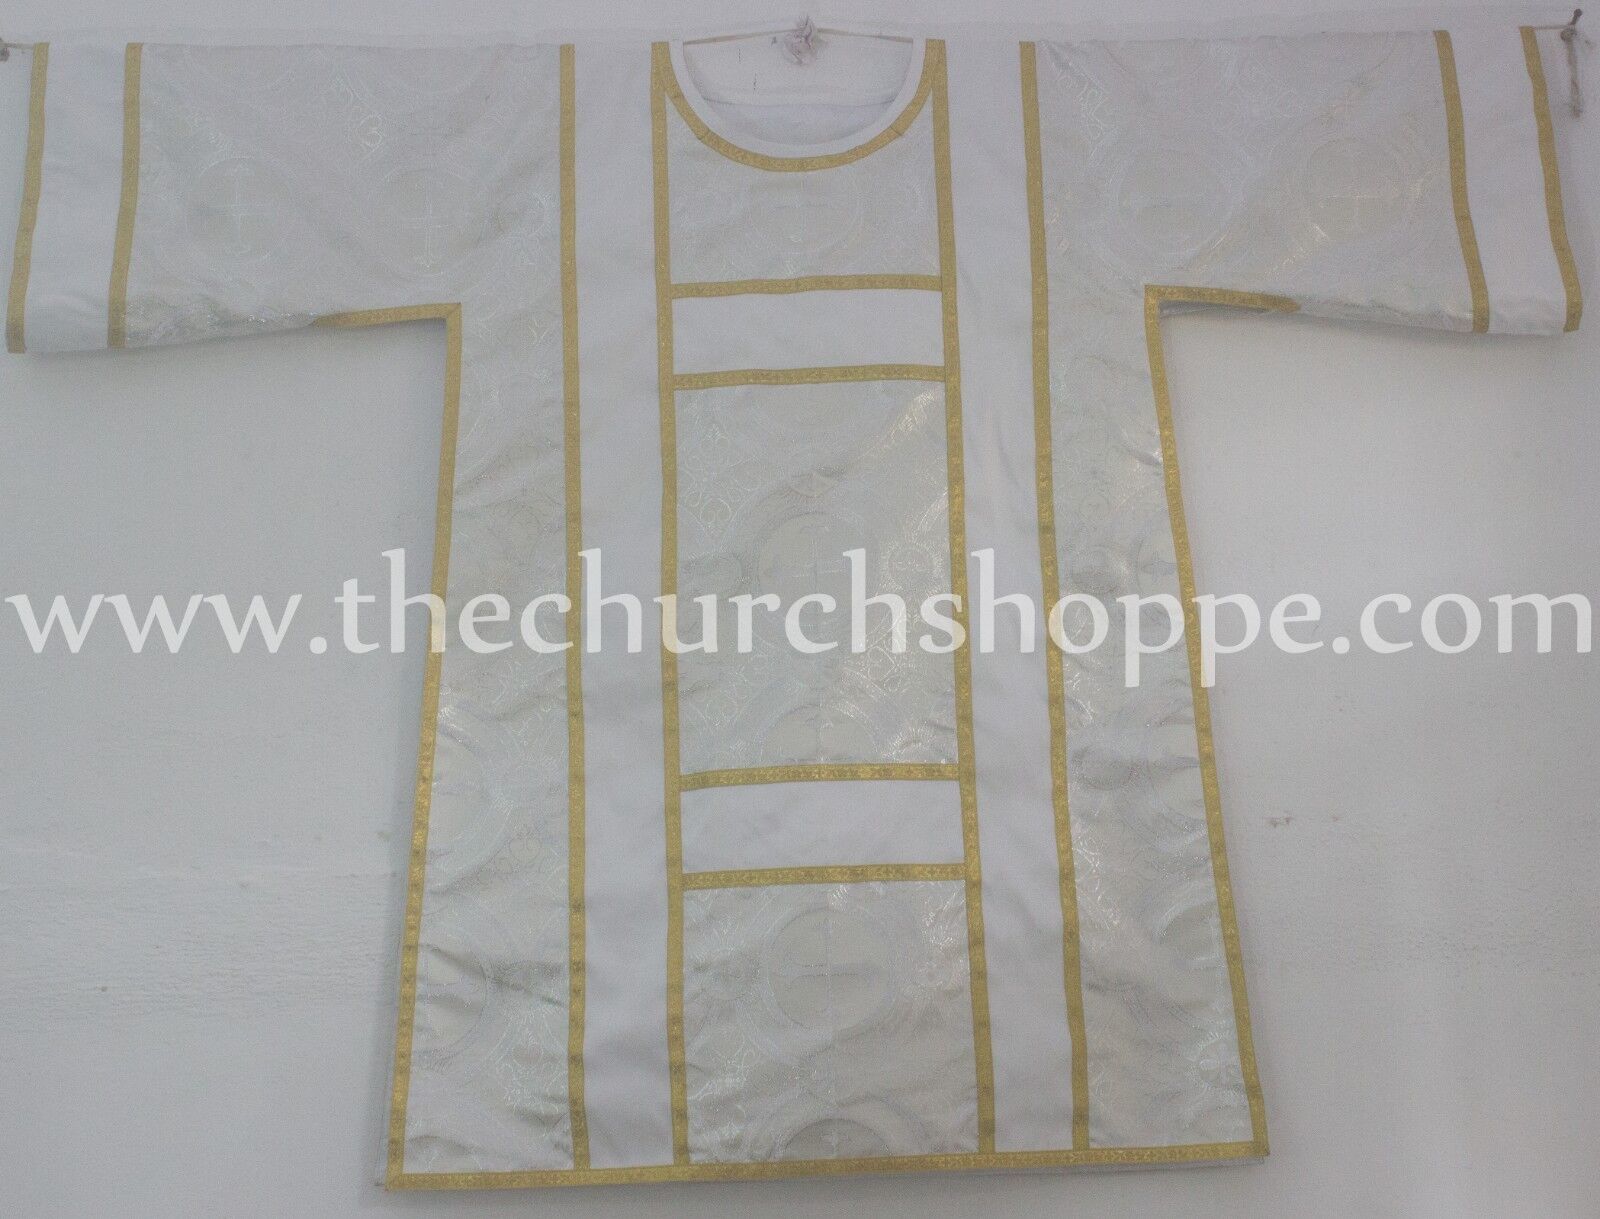 Spanish Dalmatic Metallic Silver vestment with Deacon's stole & maniple,chasuble